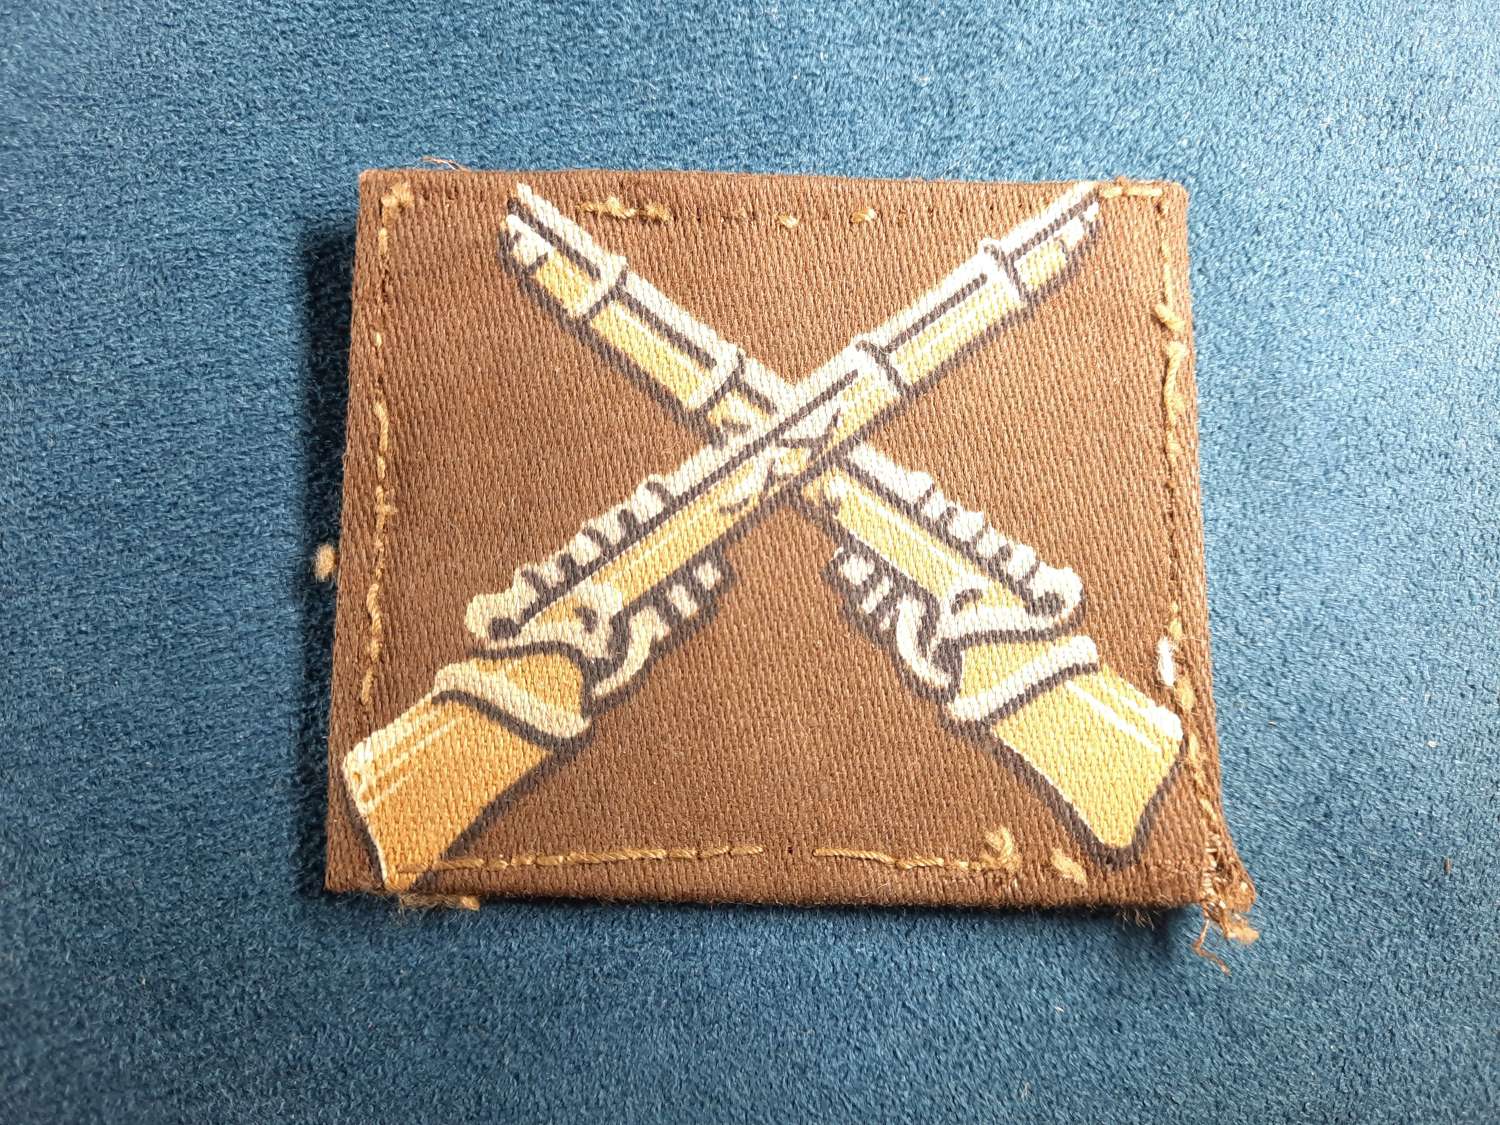 Weapons Training Instructor/ Marksman Printed trade patch